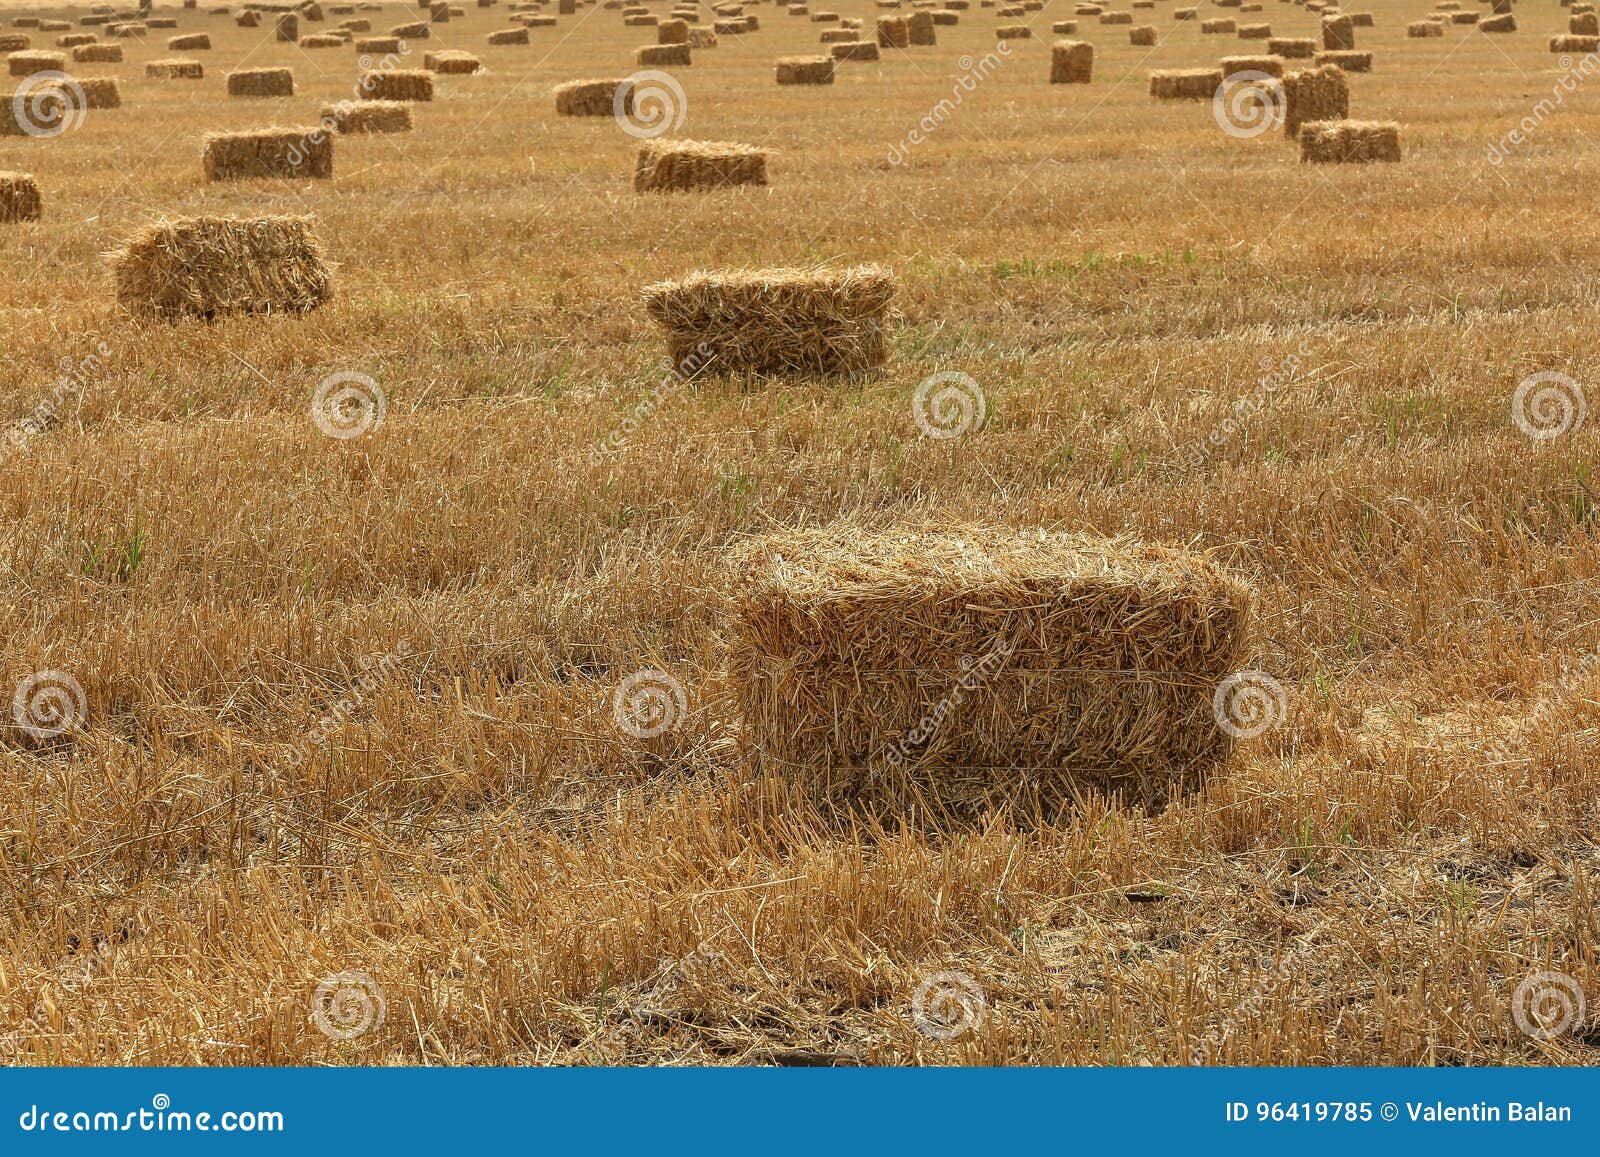 Square Hay bales stock image. Image of countryside, farm - 96419785